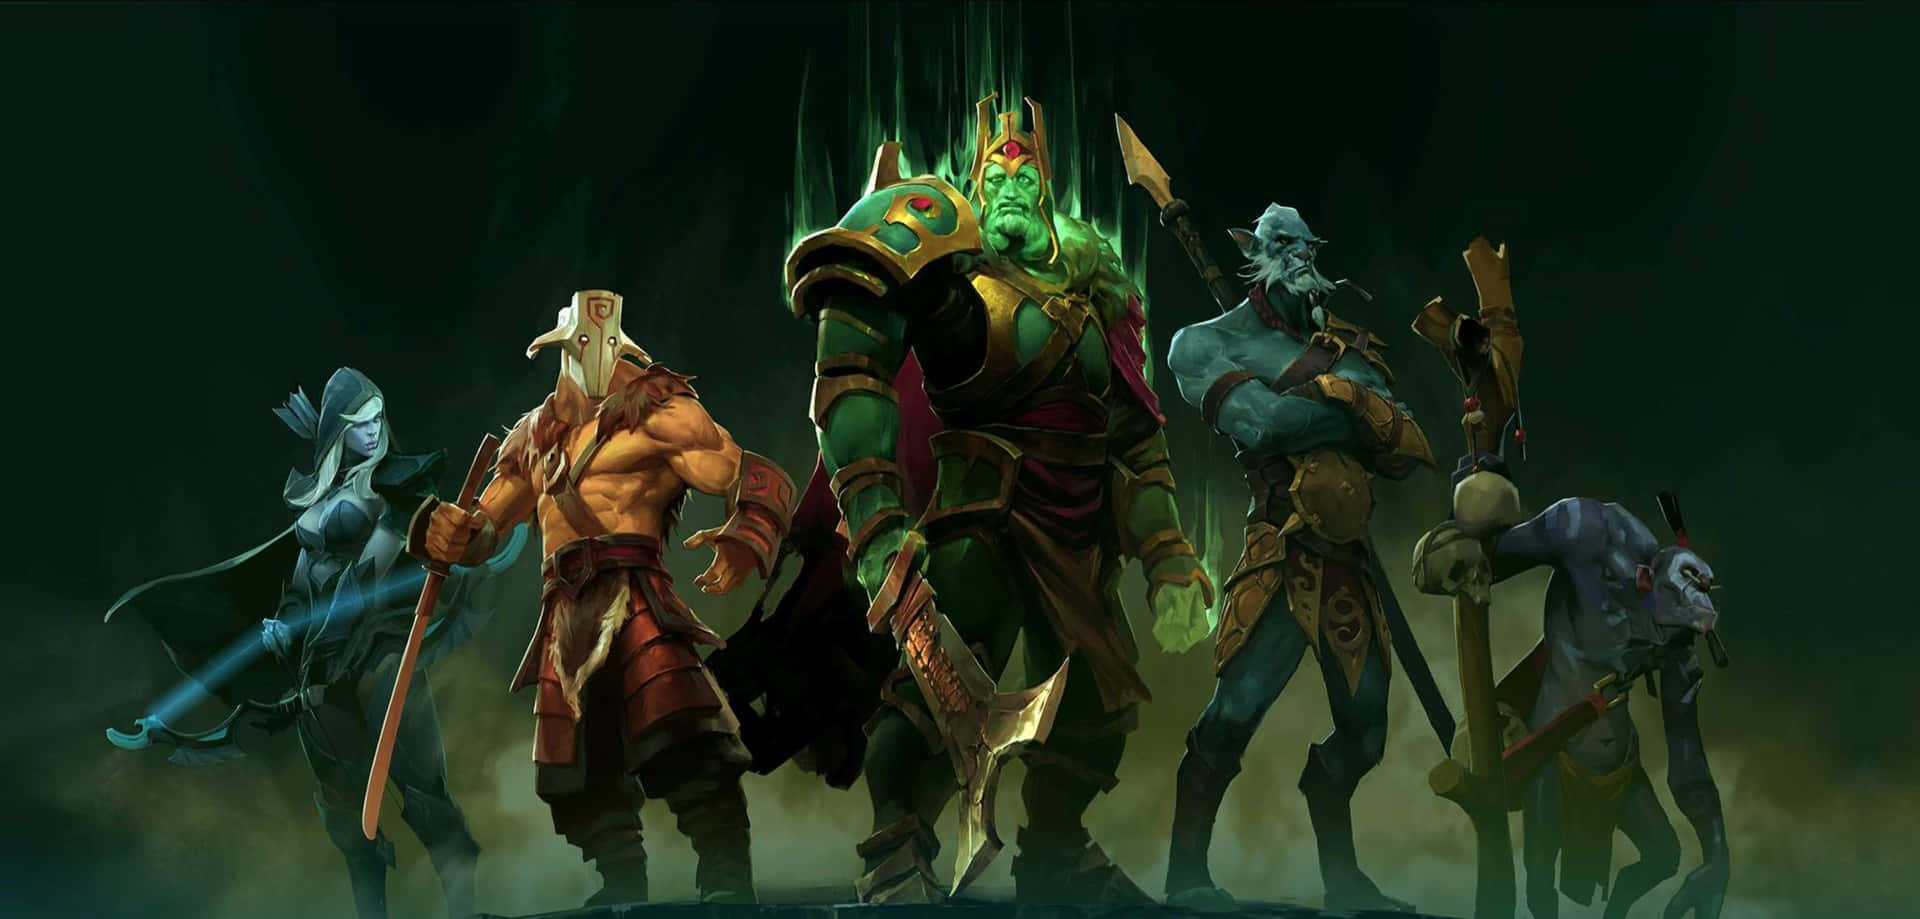 Epic Battle in the World of Dota 2